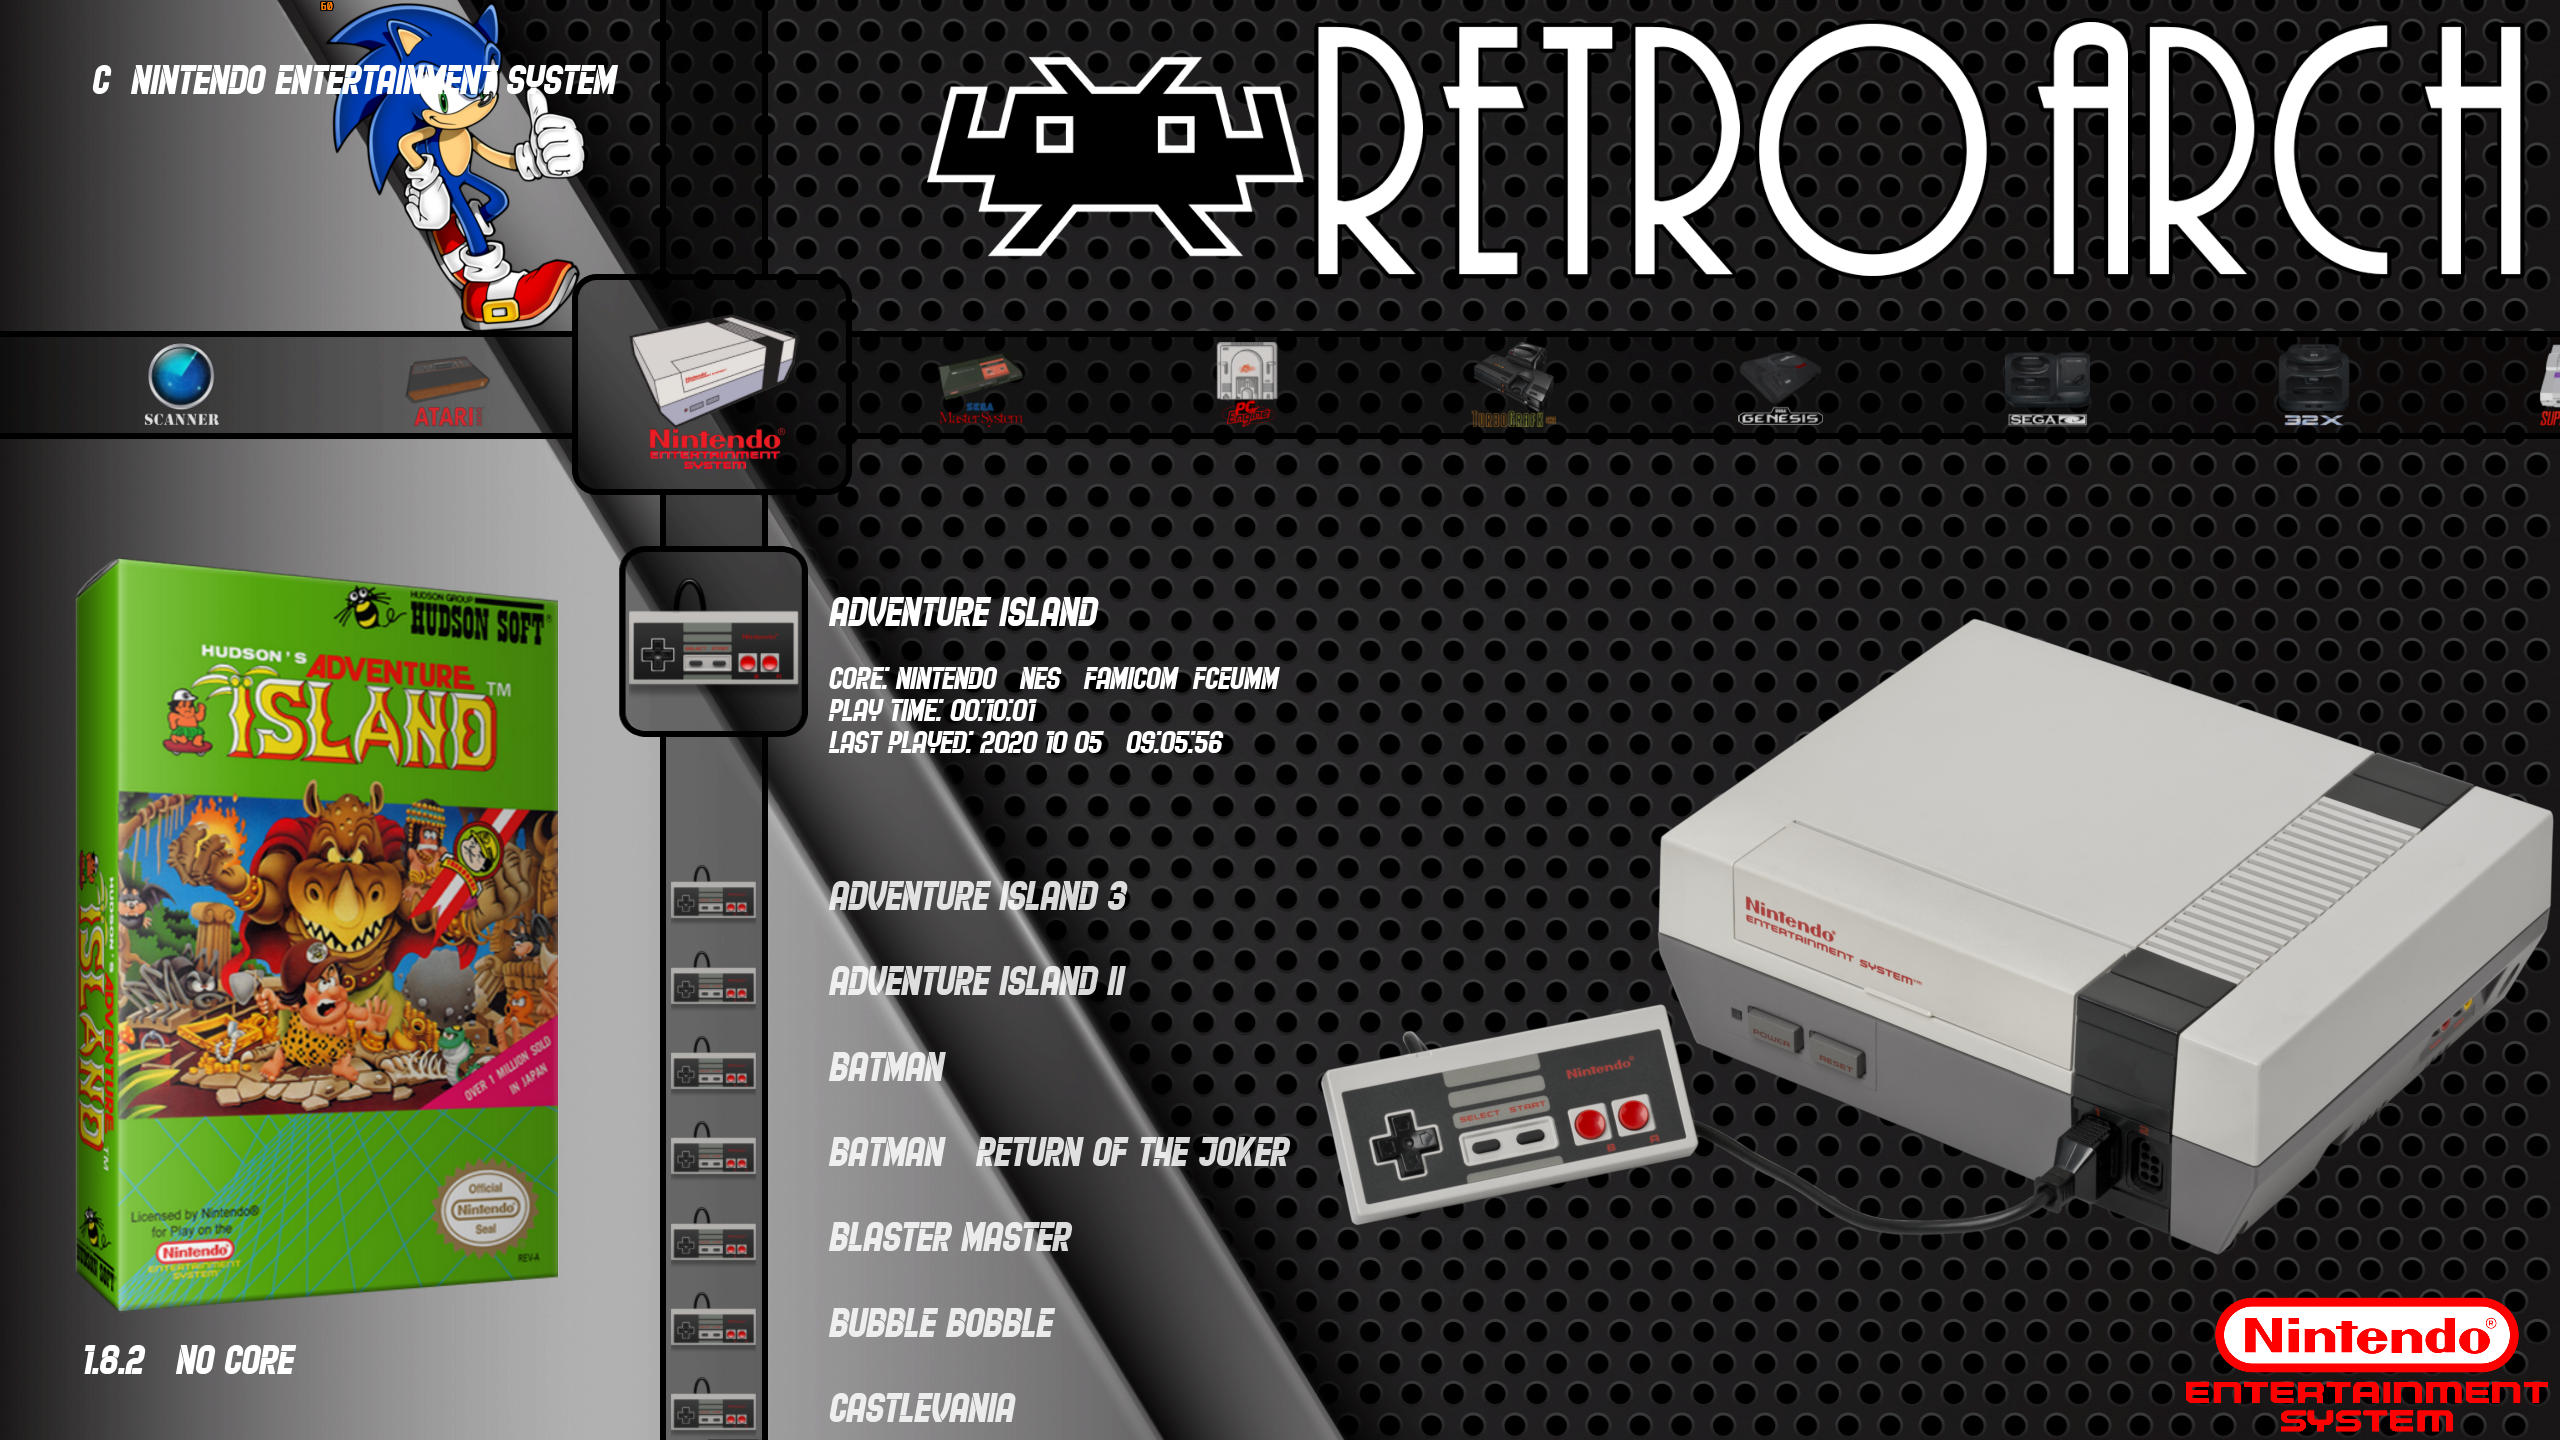 Retroarch Dynamic Background. Link provided in first caption if anyone wants them: RetroArch